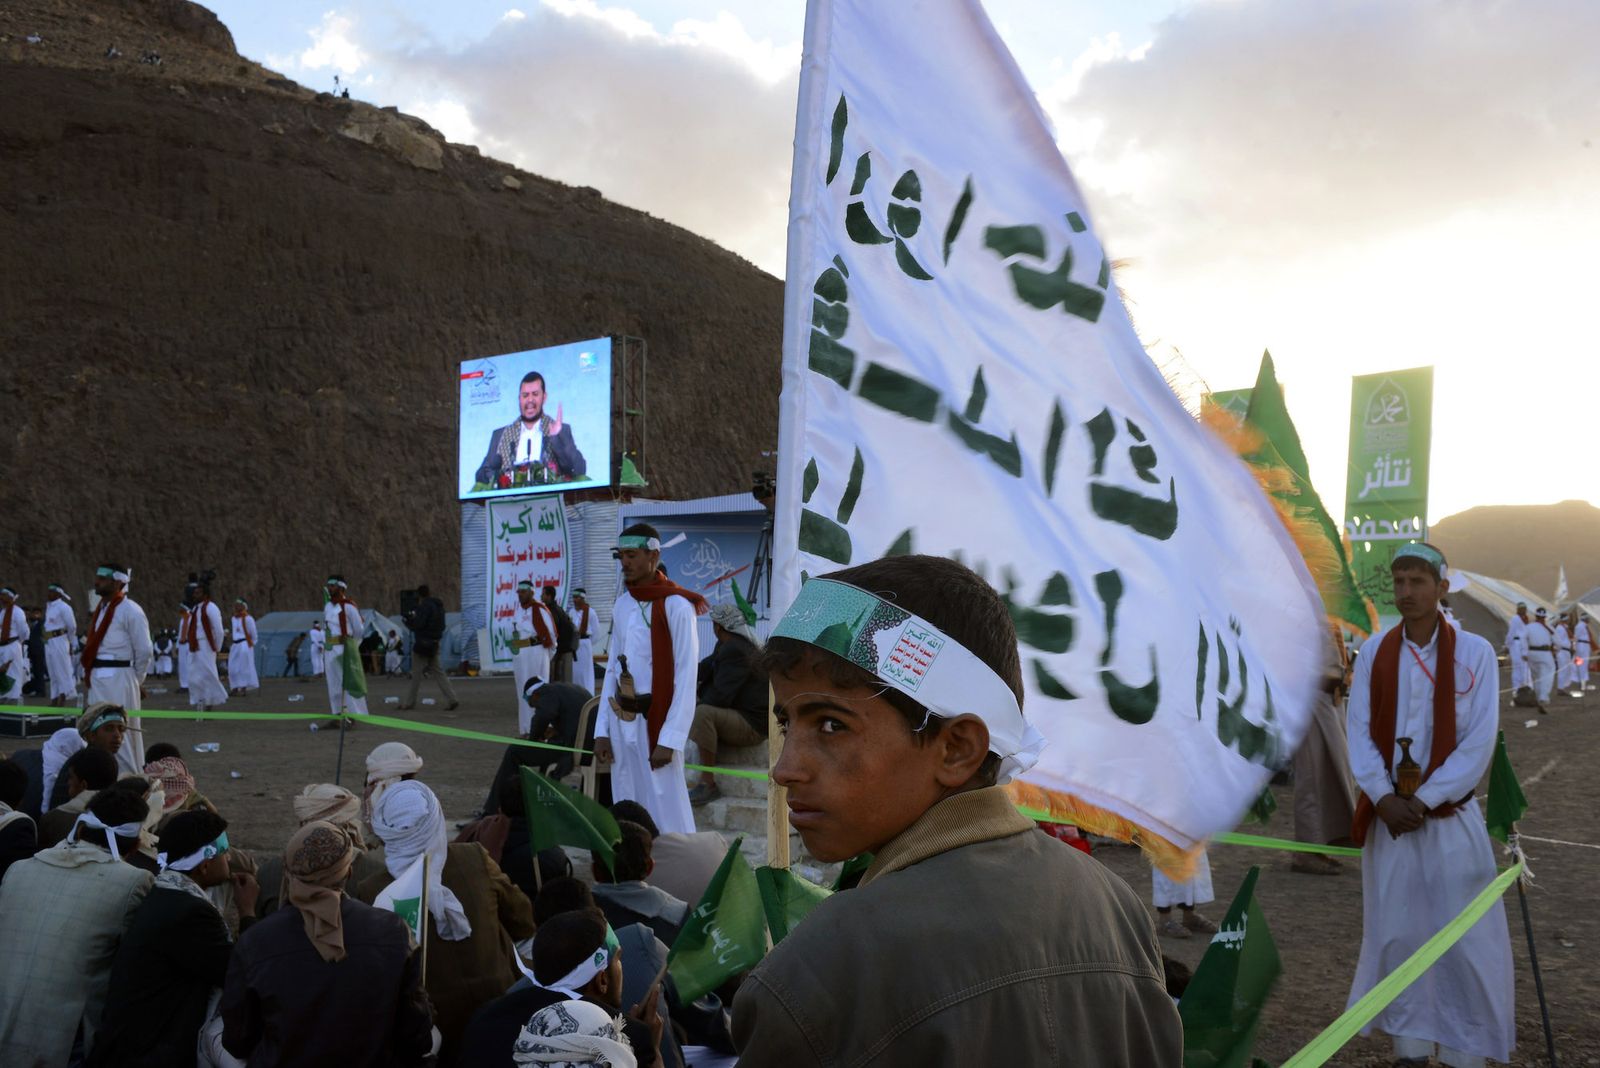 © Alex Potter - A young boy supporting the Houthis holds a flag at one of their rallies.